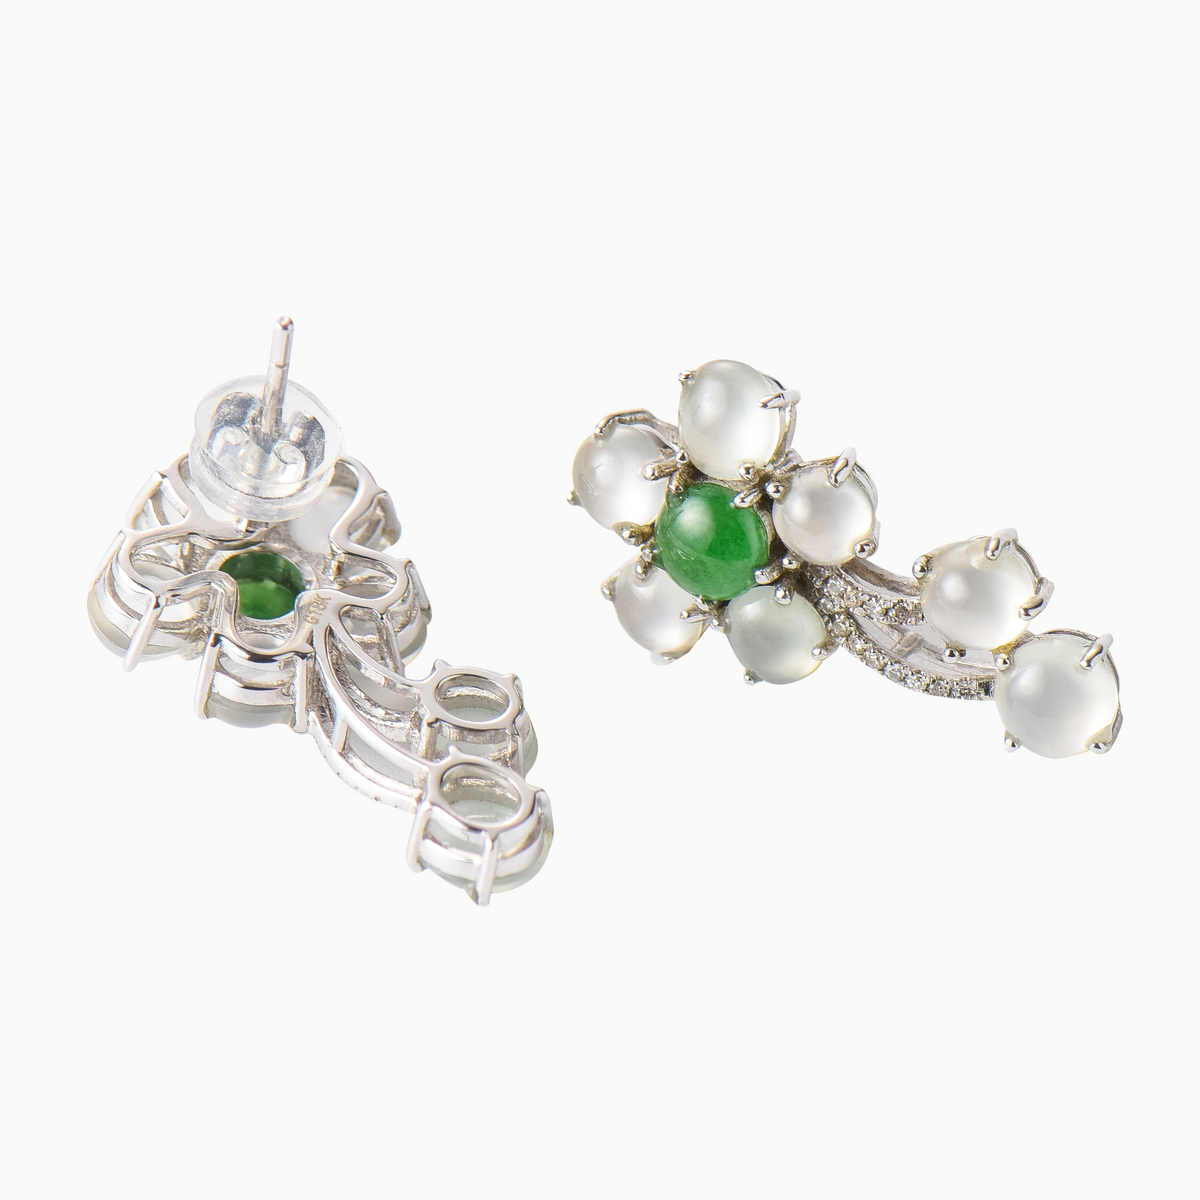 Blossoms: White Jadeite Earrings with Green Jadeite and Diamonds